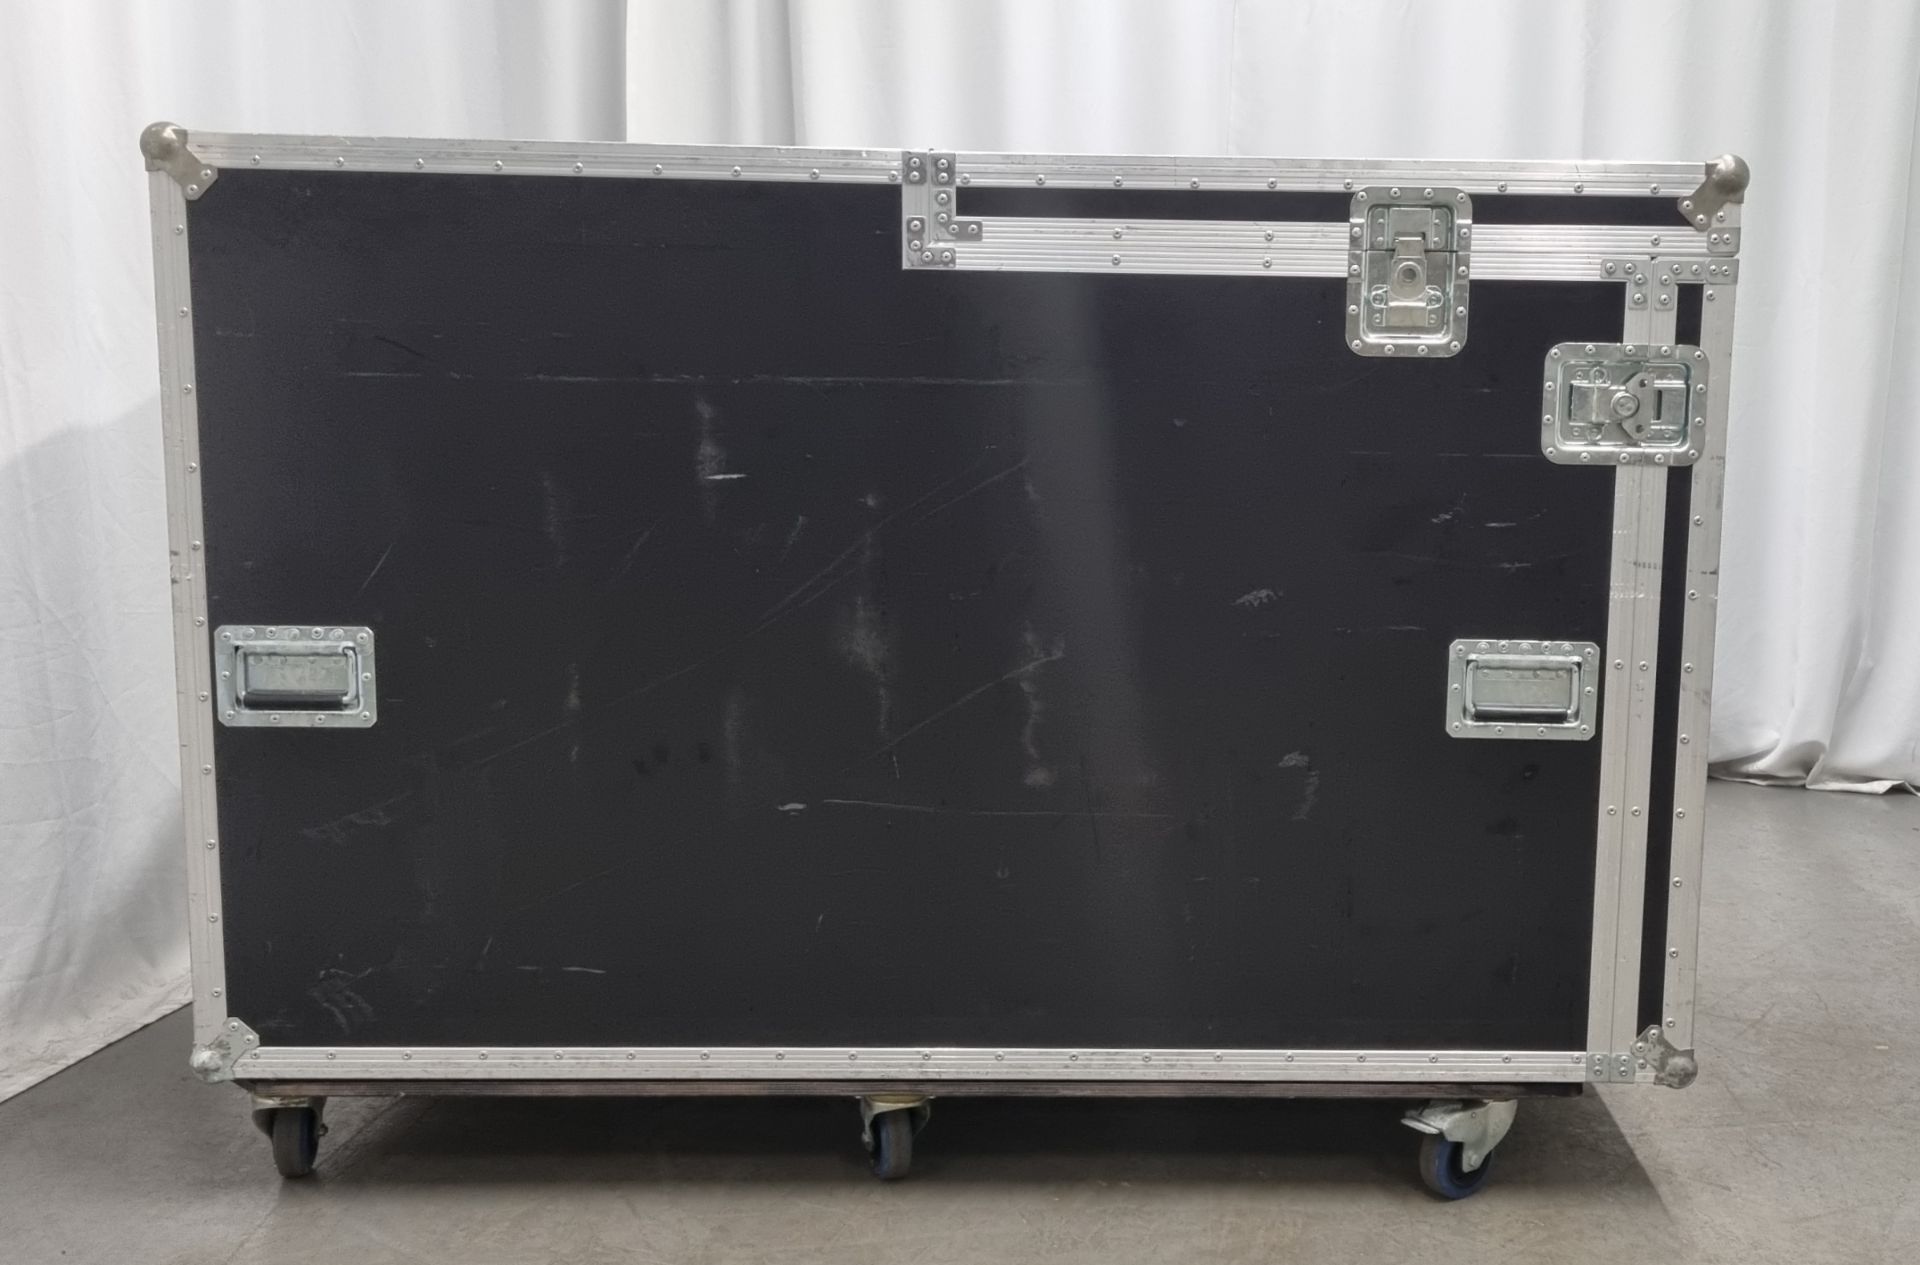 Musser M51 Xylophone with mobile transport case - Image 20 of 21